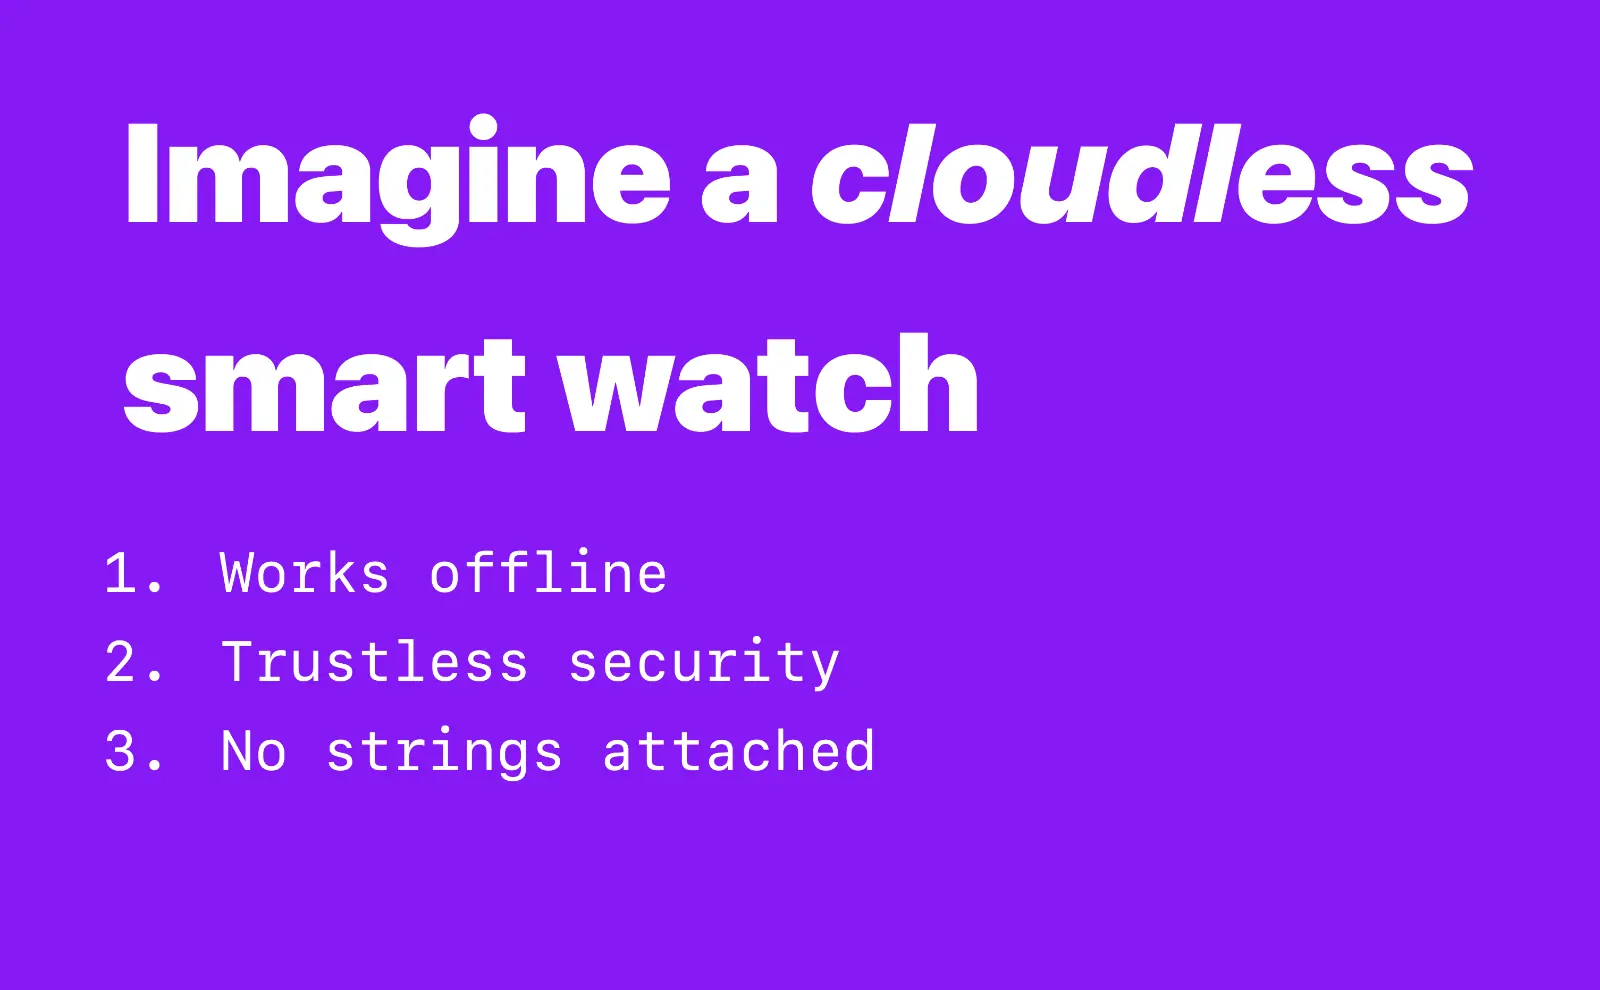 Imagine a cloudless smart watch. 1. Works offline 2. Trustless security 3. No strings attached